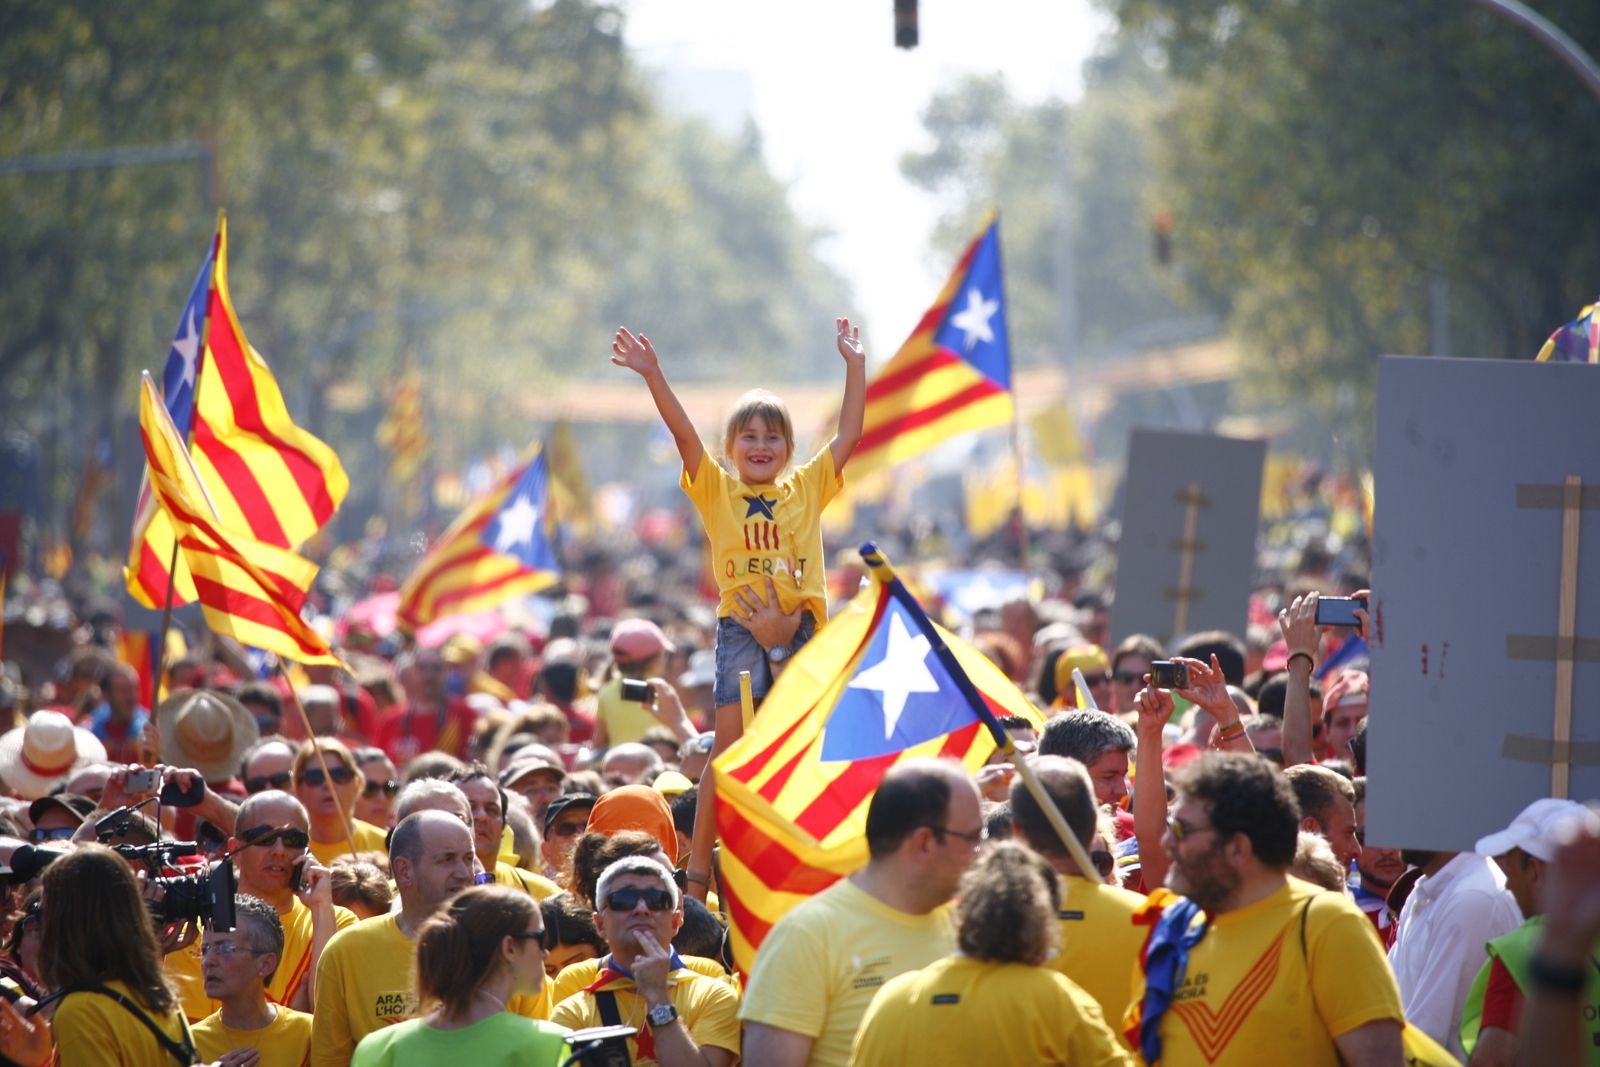 No, Mas: Spain rejects Catalan call for independence, The Independent